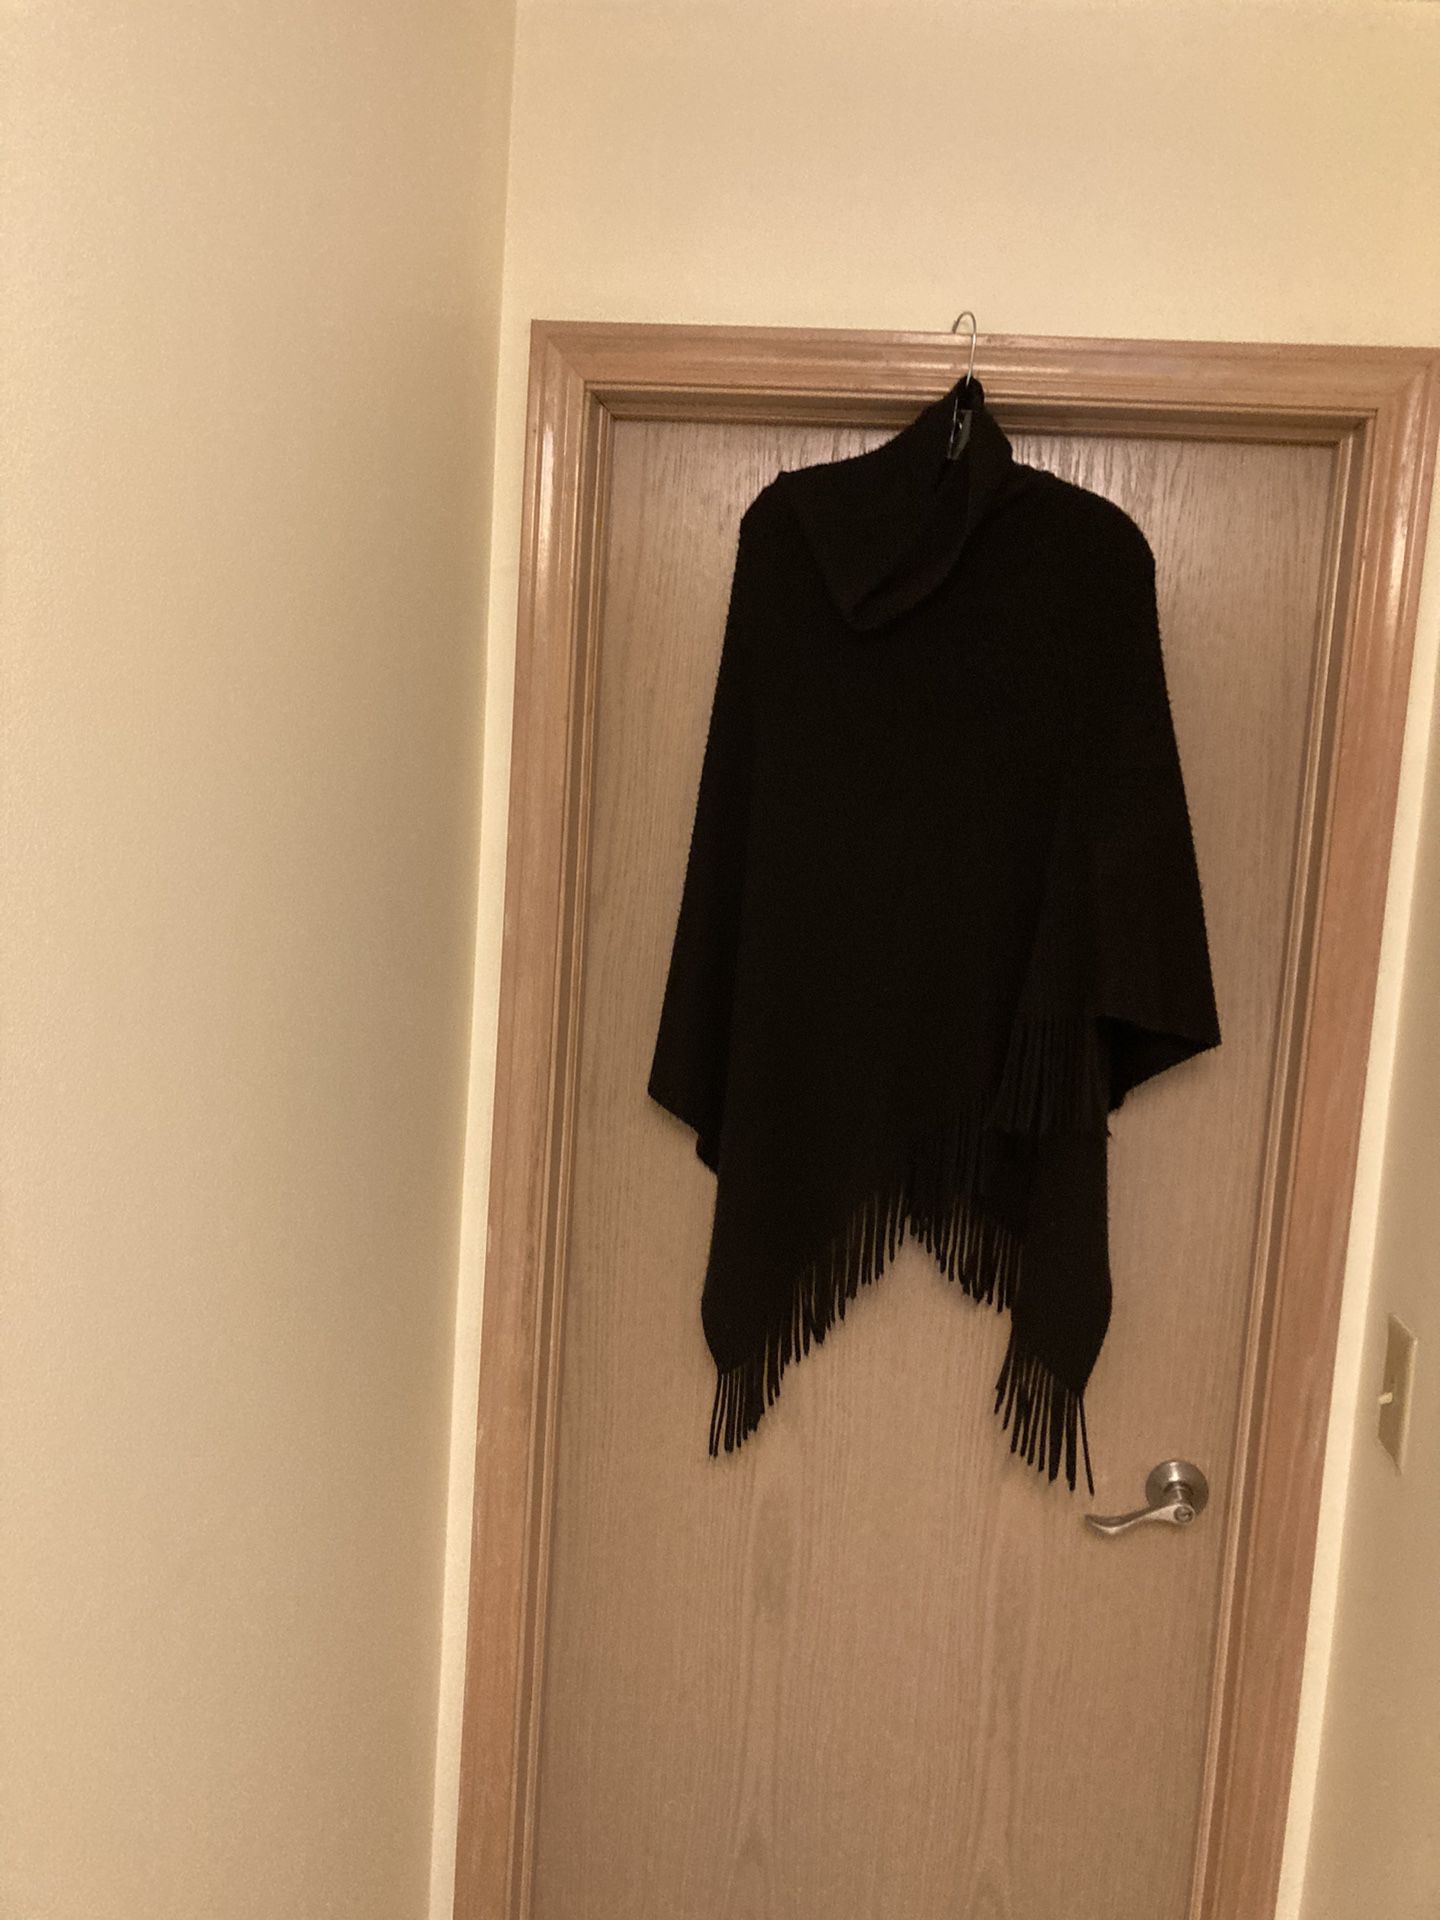 Ladies Black Poncho, Fringe Trim, Large, Fits Most, Stay Warm With Soft Washable Fabric